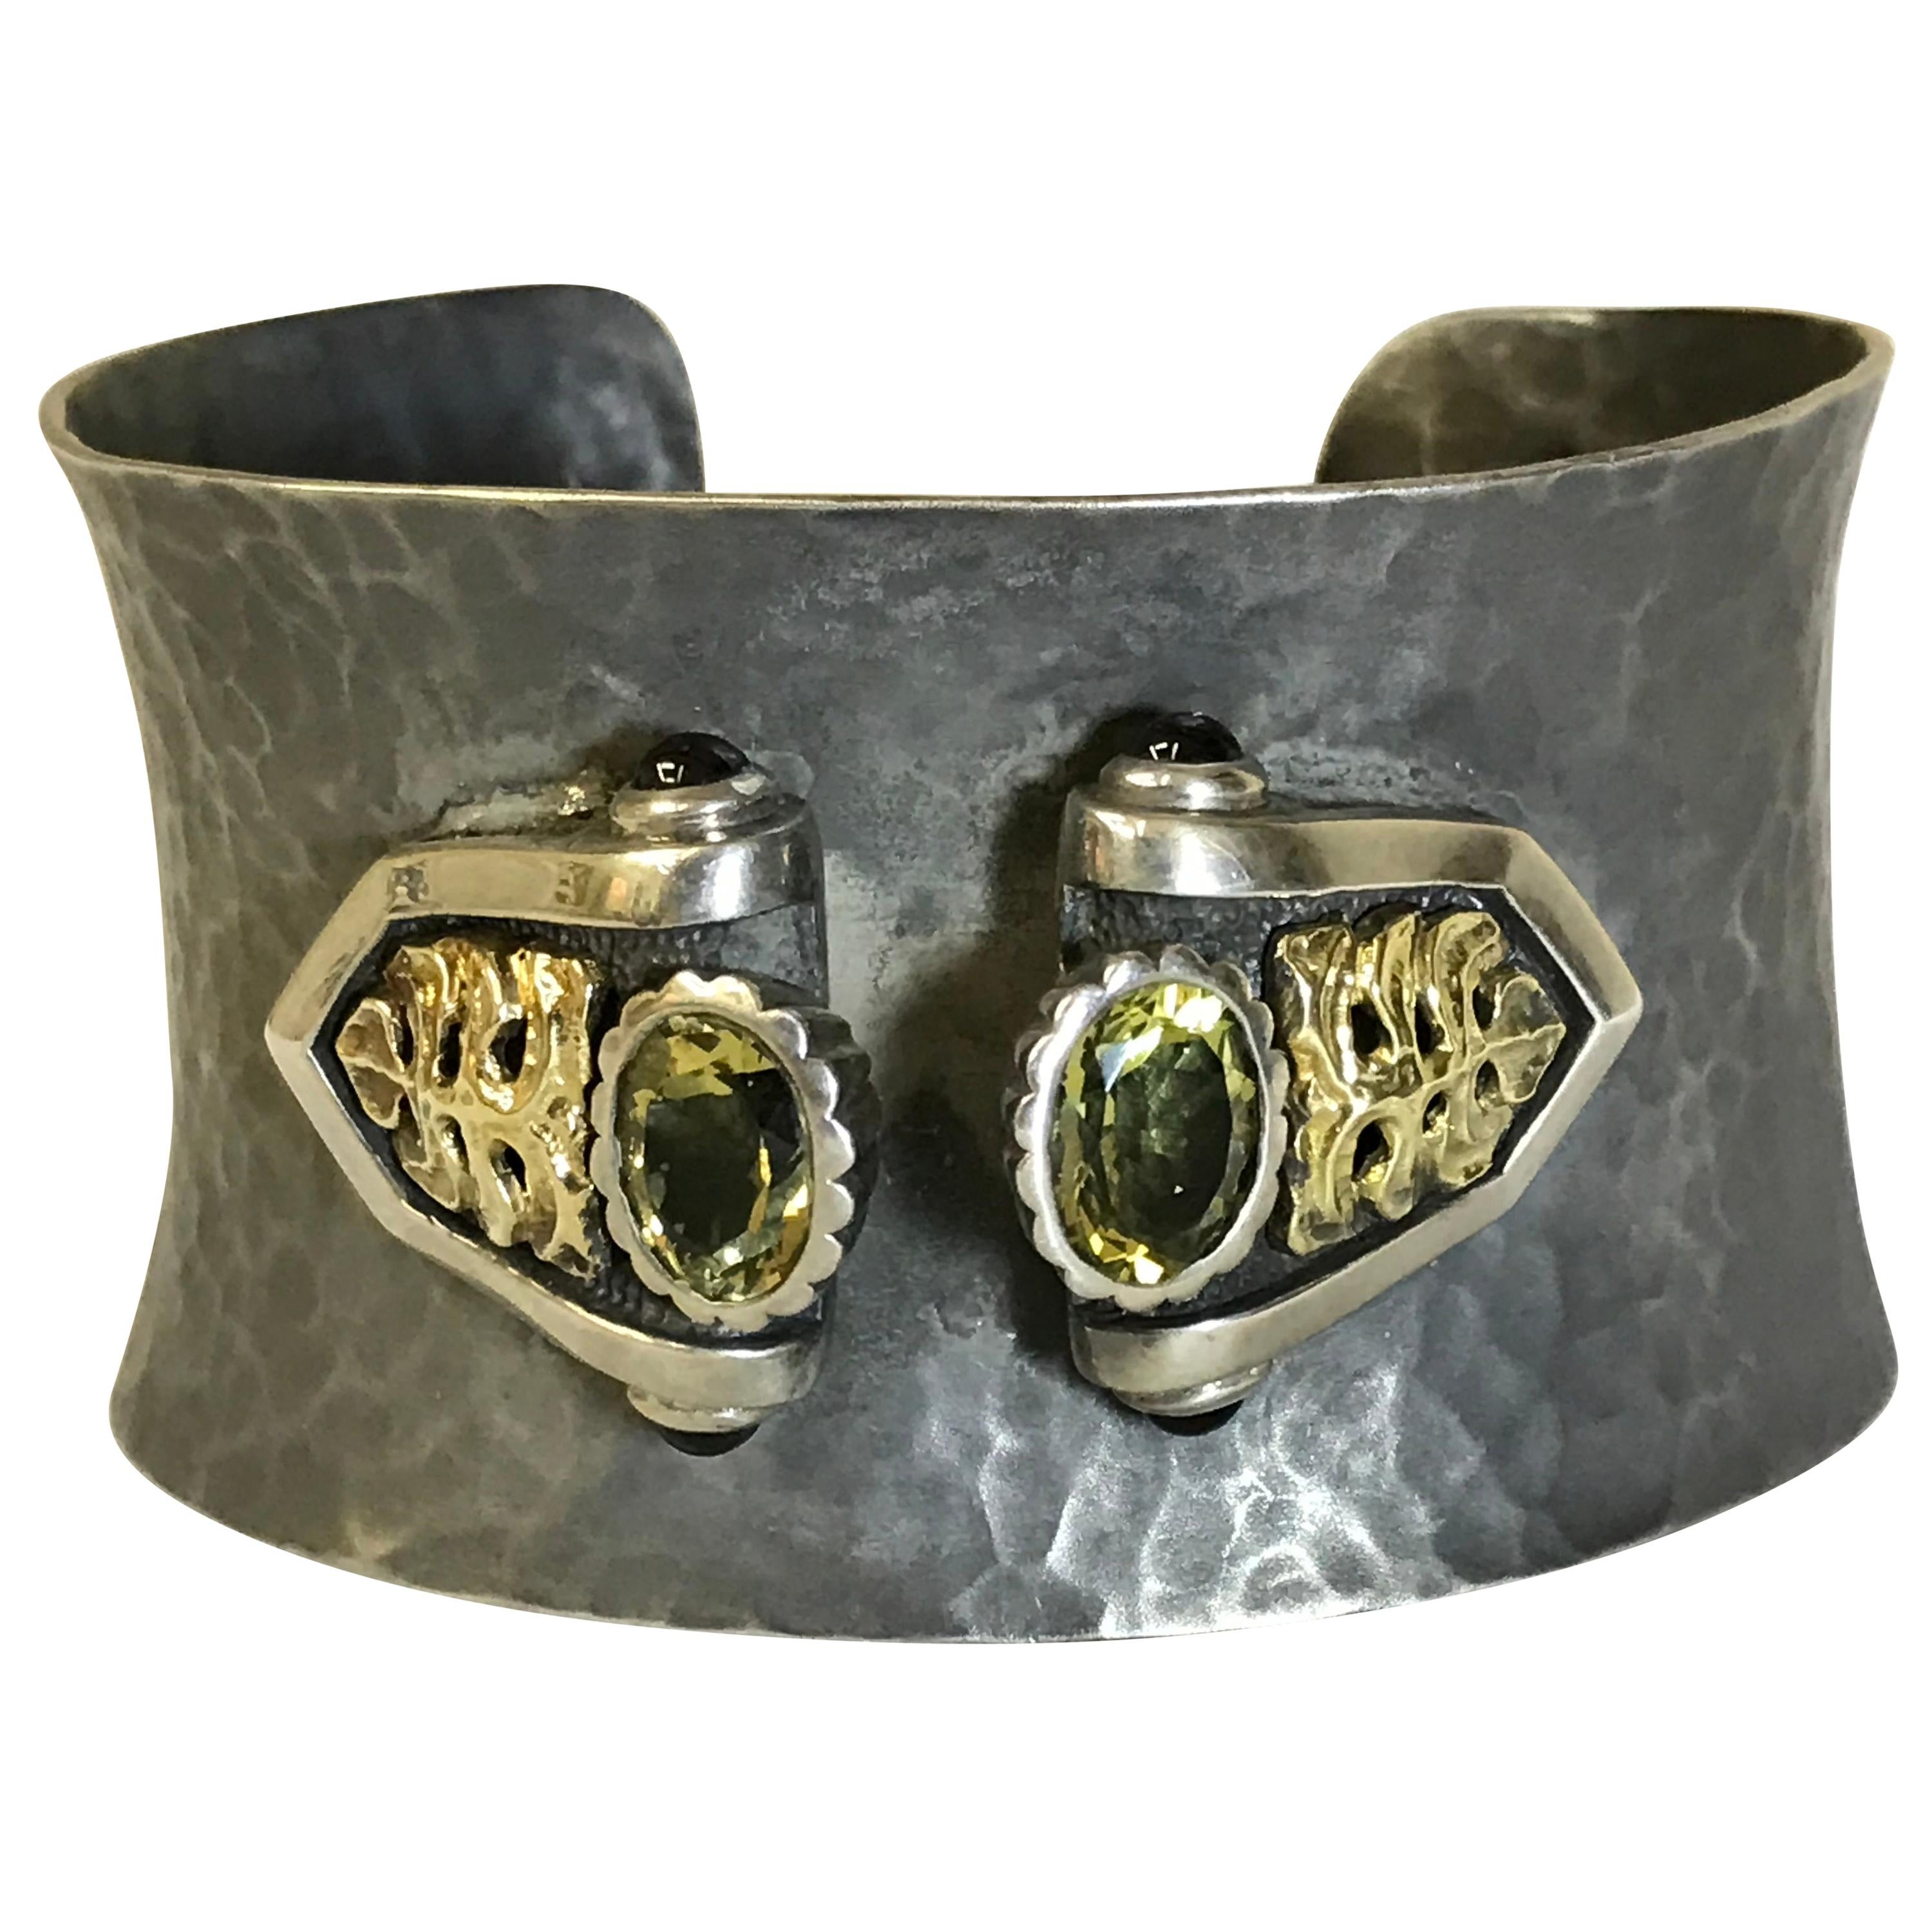 Black Hammered Cuff Bracelet with Adornment